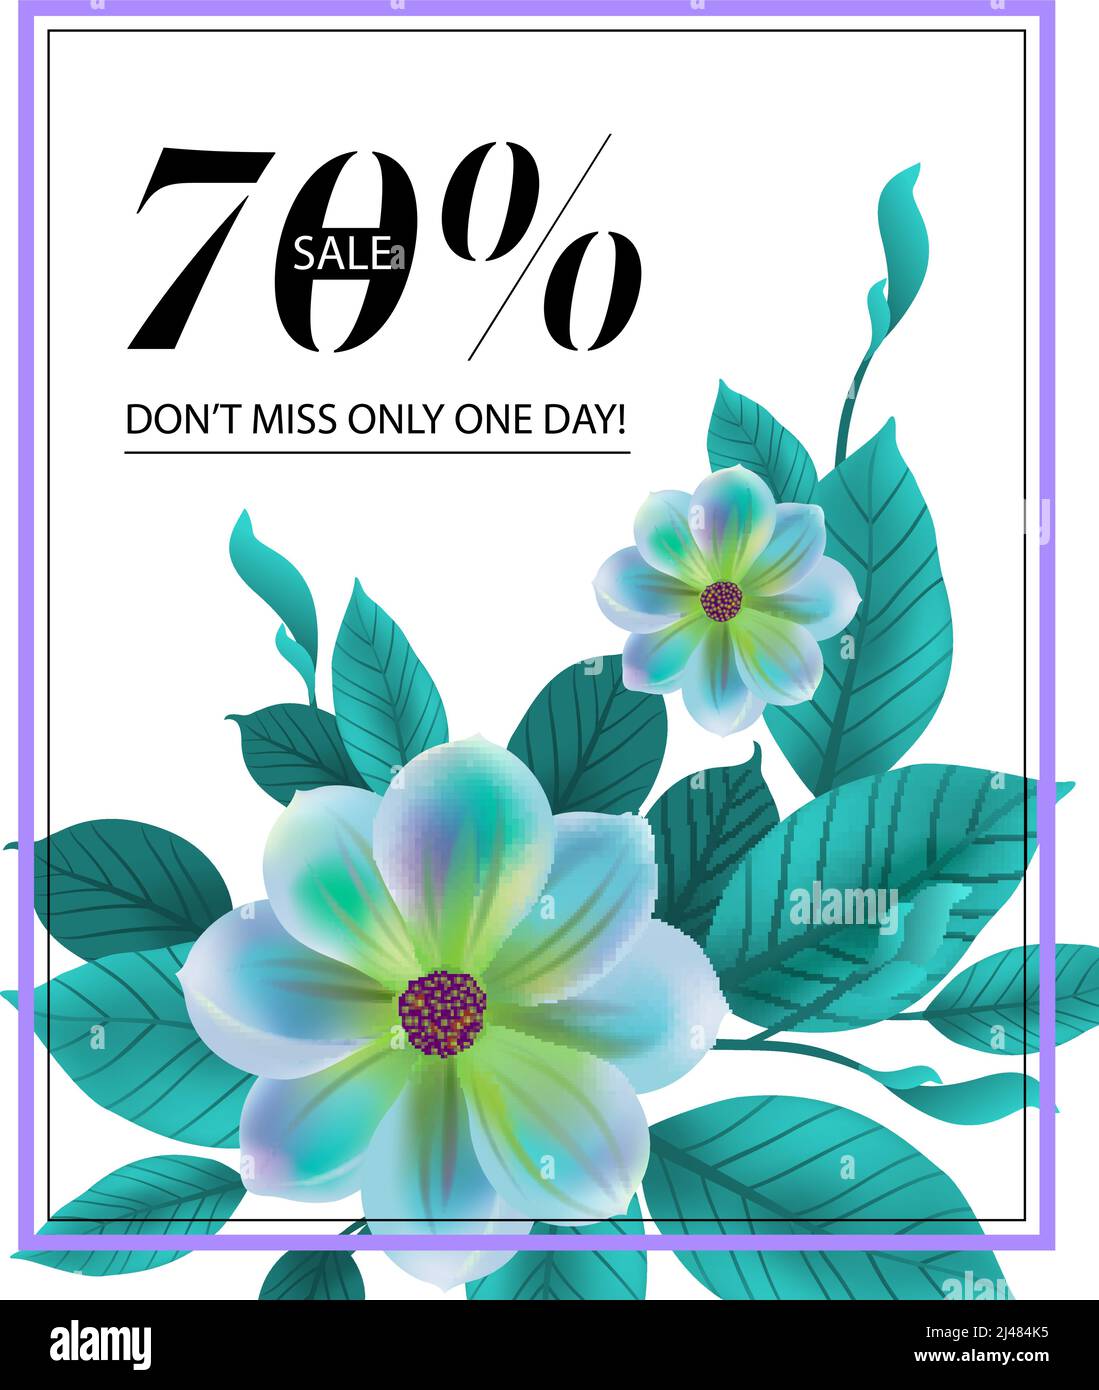 Seventy percent sale, do not miss only one day, flyer design with ...